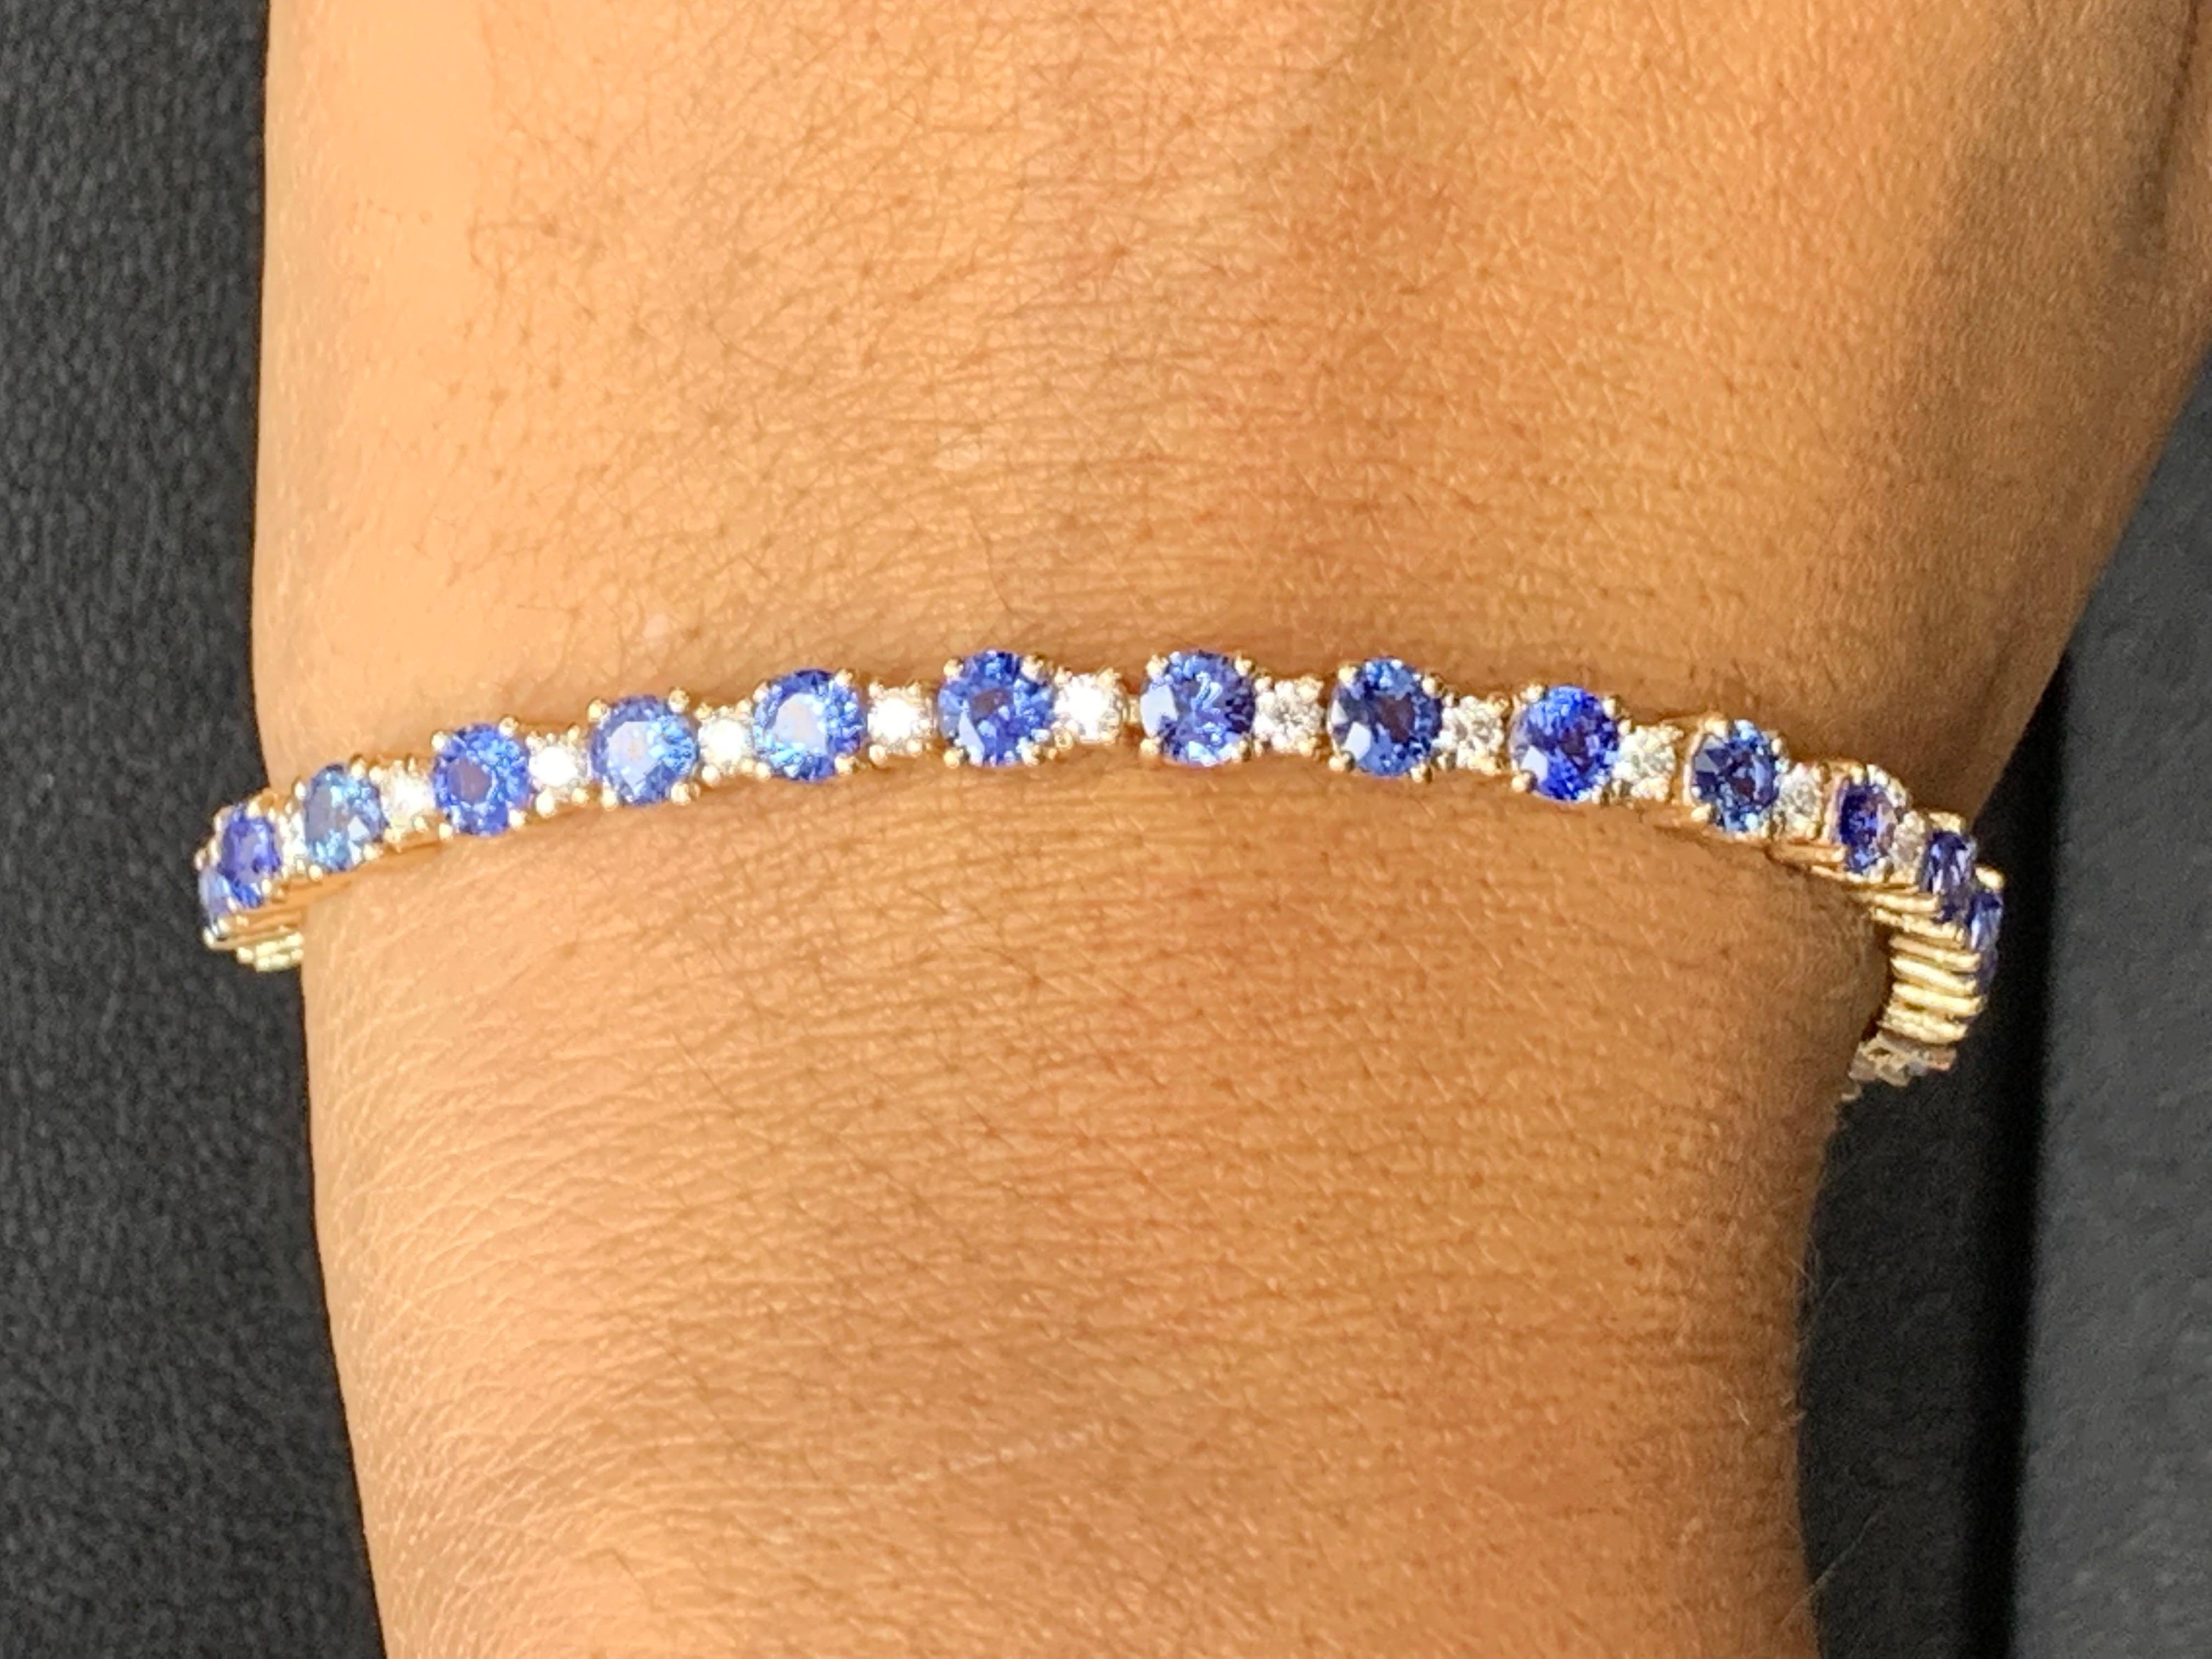 Showcasing 7.80 carats total of 28 blue sapphires, elegantly alternating with 1.40 carats of 28 round brilliant diamonds. Made in 14 karat yellow gold.

Style available in different price ranges. Prices are based on your selection of the 4C’s